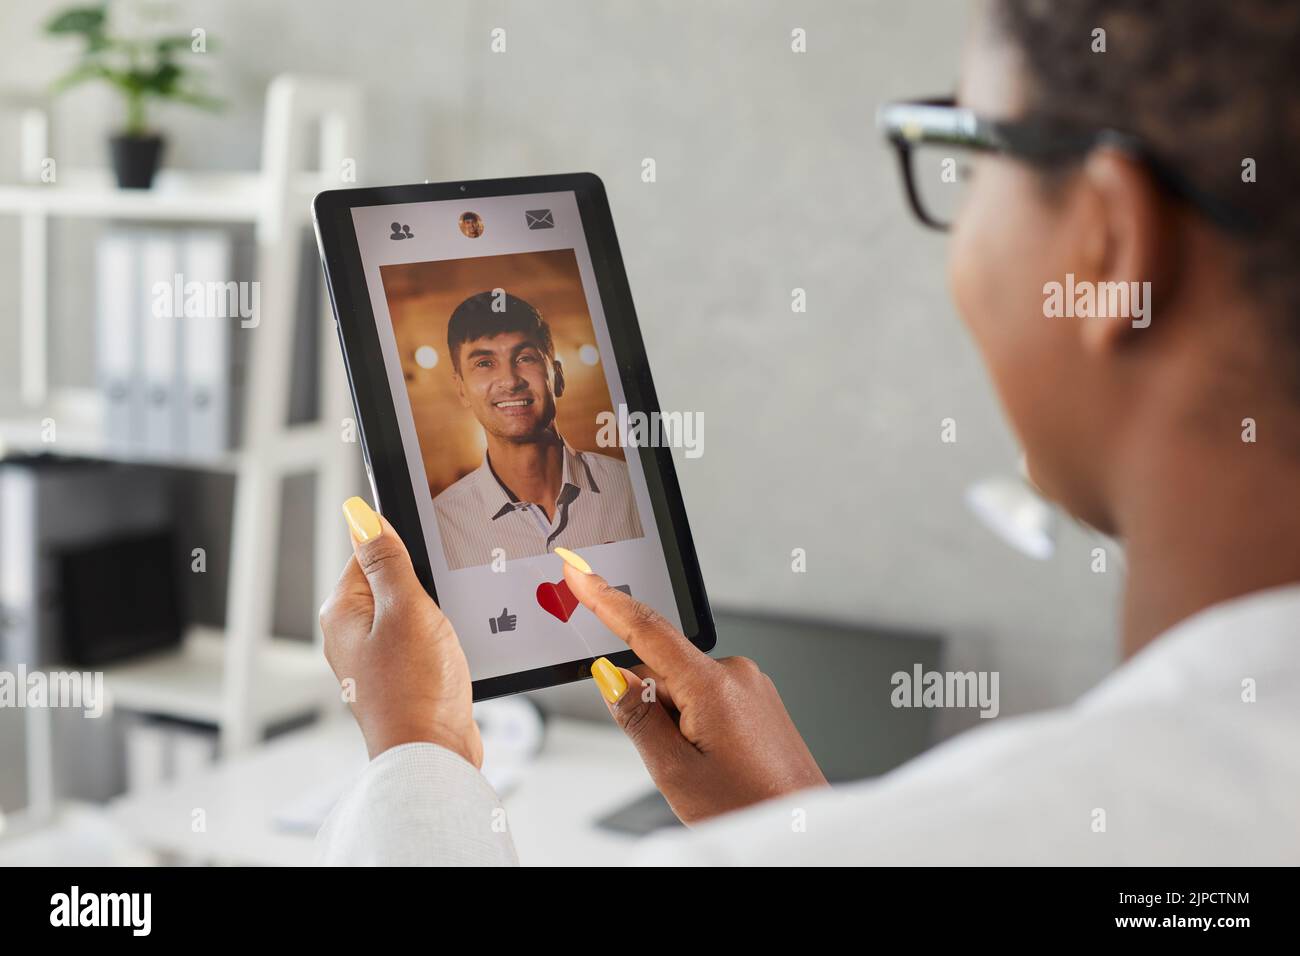 Woman uses digital tablet and likes photo of young man on online dating app or website Stock Photo